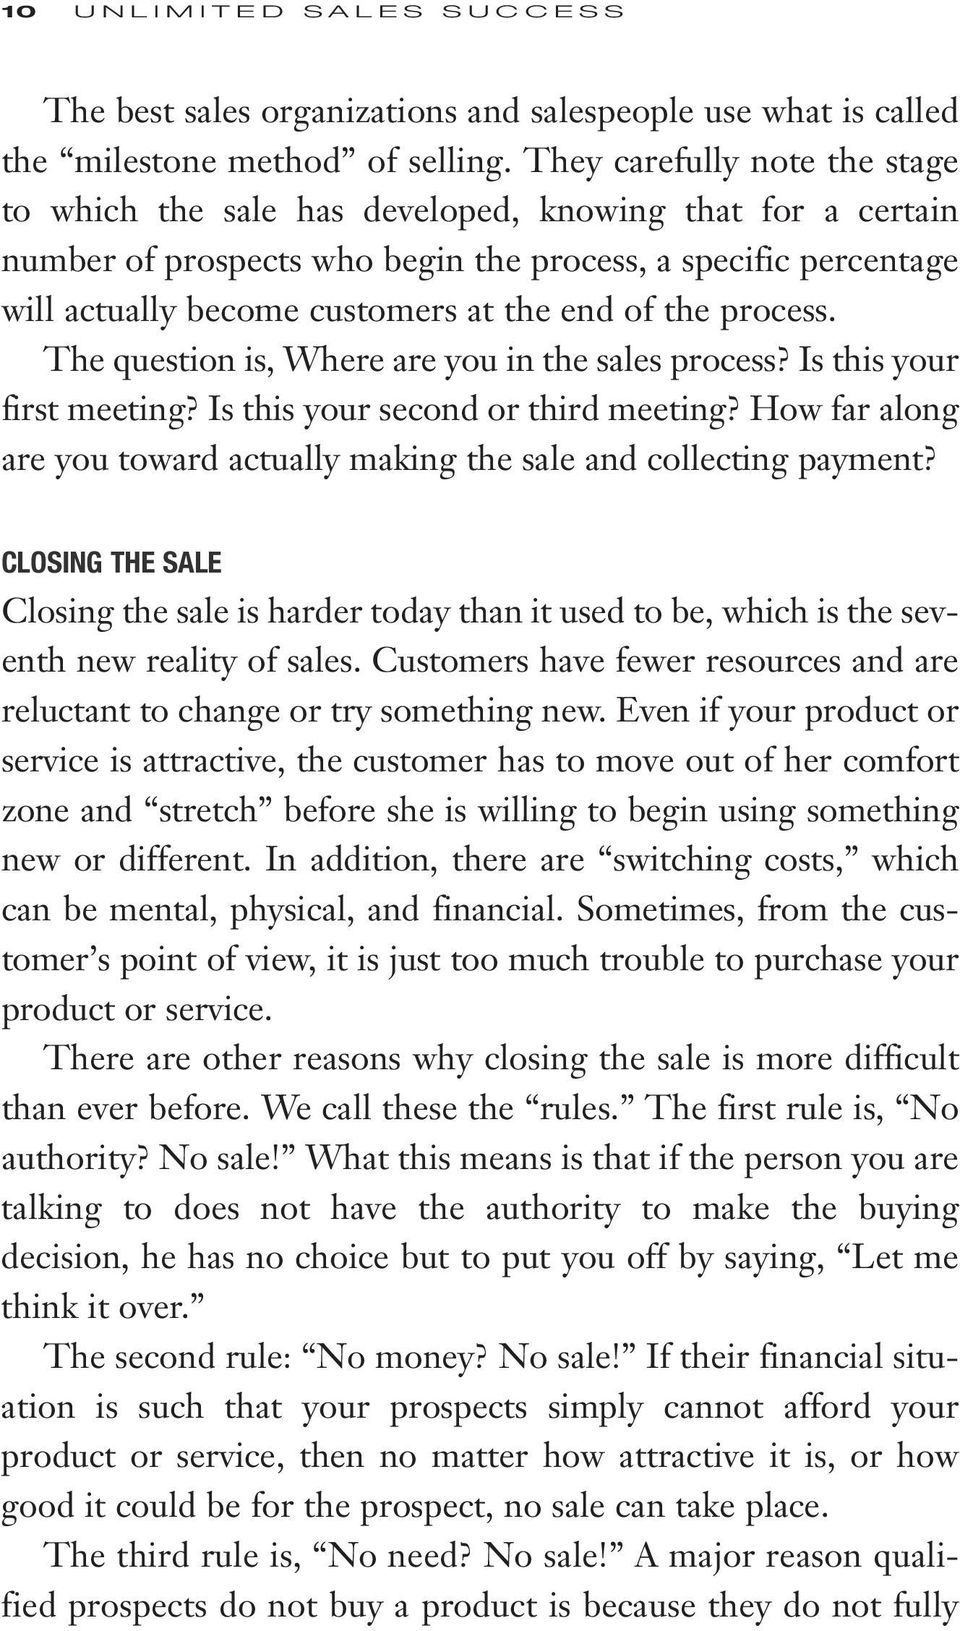 the process. The question is, Where are you in the sales process? Is this your first meeting? Is this your second or third meeting?